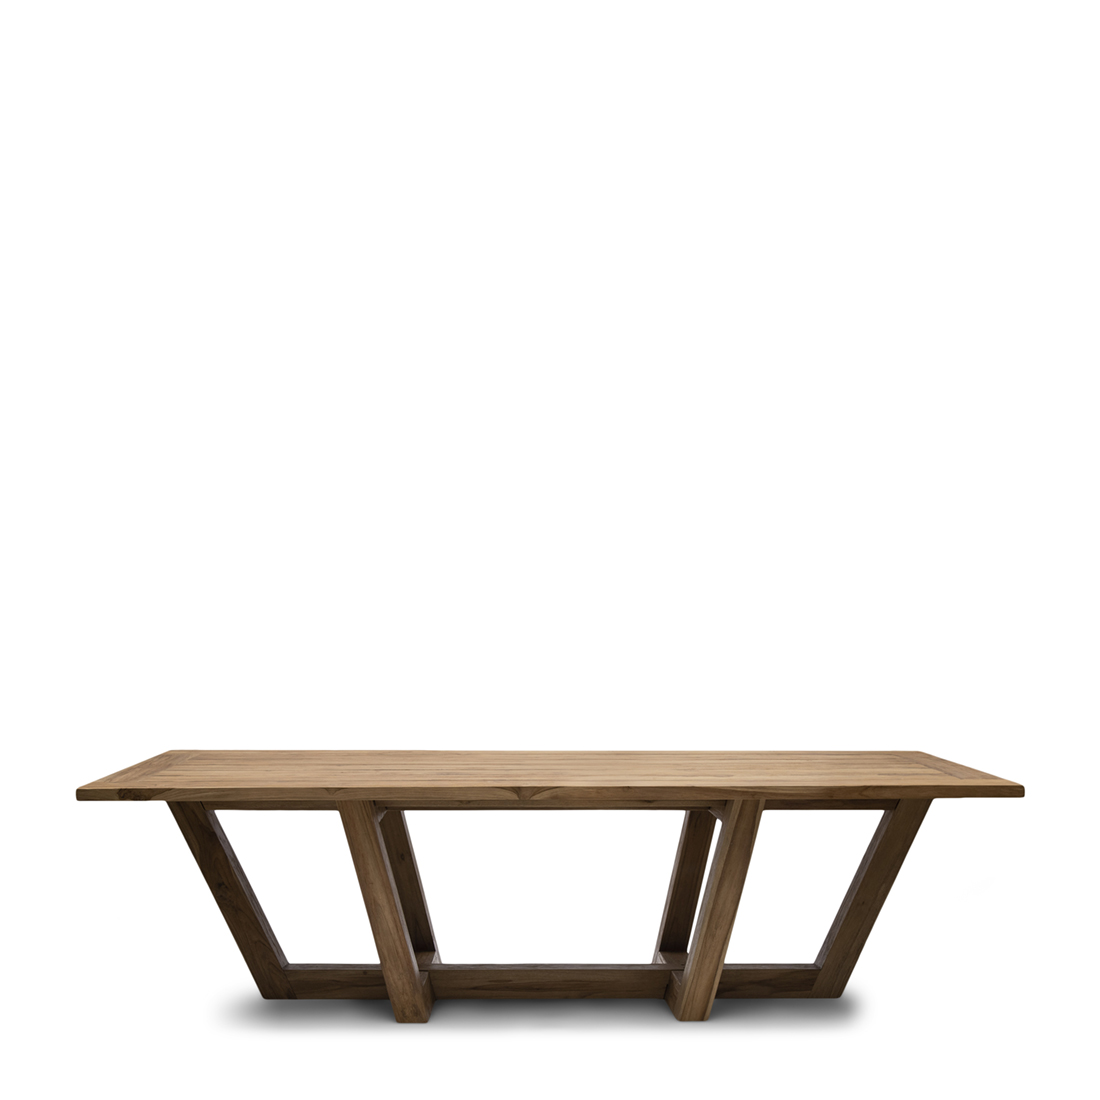 Riviera Maison Tuintafel Hout - Tanjung Outdoor Table - 300x100 cm - Bruin